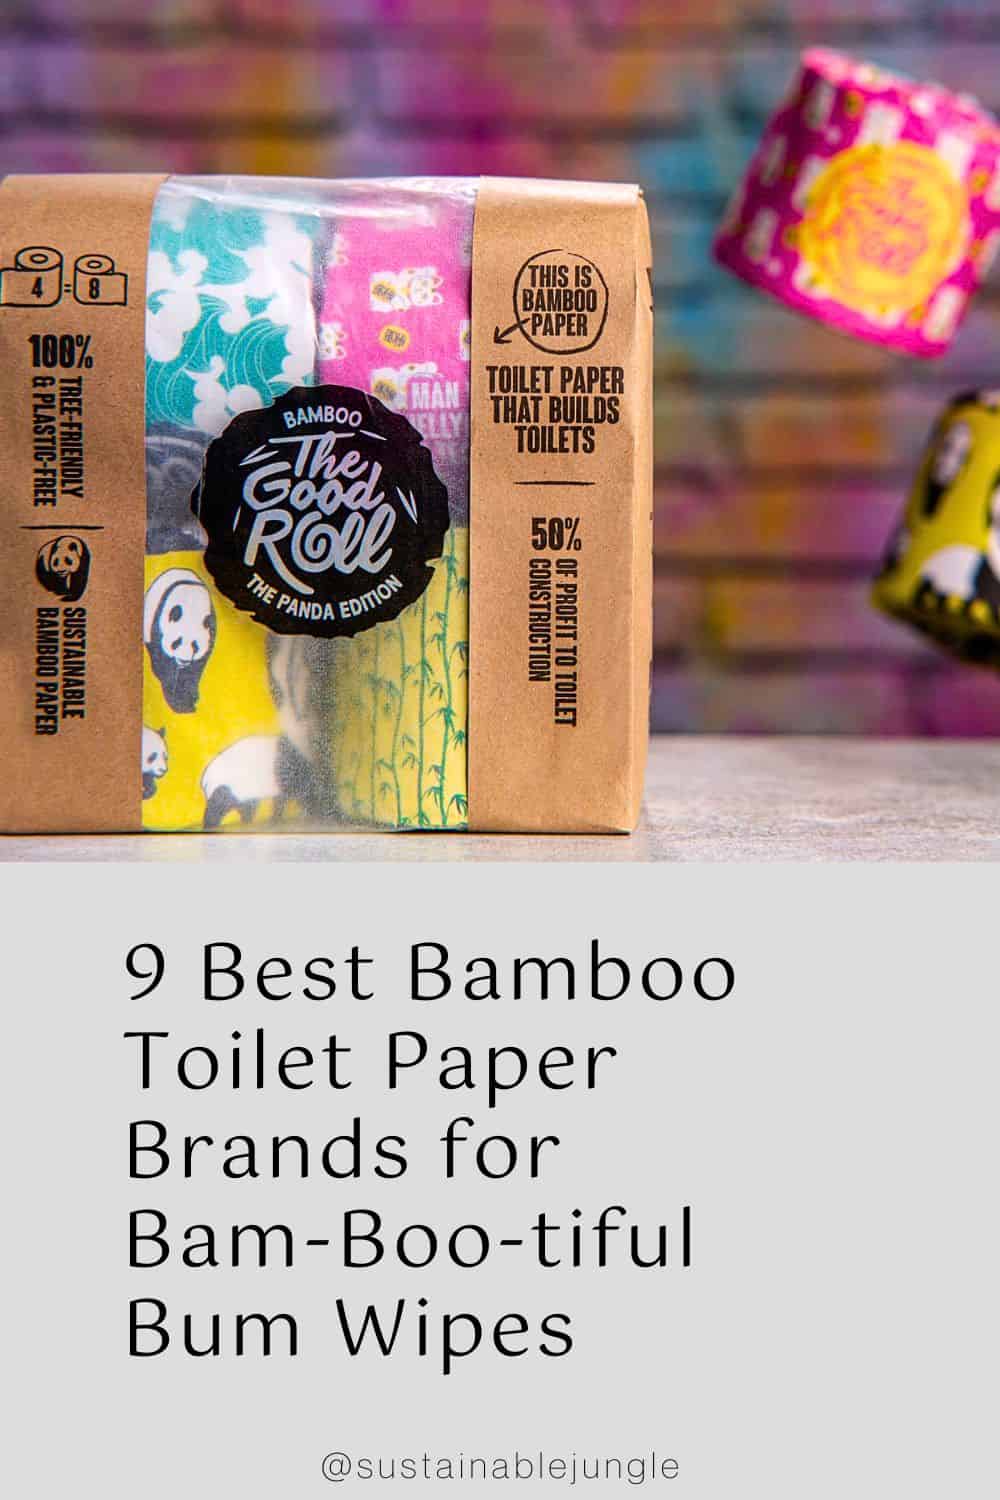 9 Best Bamboo Toilet Paper Brands for Bam-Boo-tiful Bum Wipes Image by The Good Roll #bestbambootoiletpaper #bambootoiletpaperreview #bambootoiletpaperbrands #bestbambootoiletpapersubscription #organicbambootoiletpaper #sustainablejungle